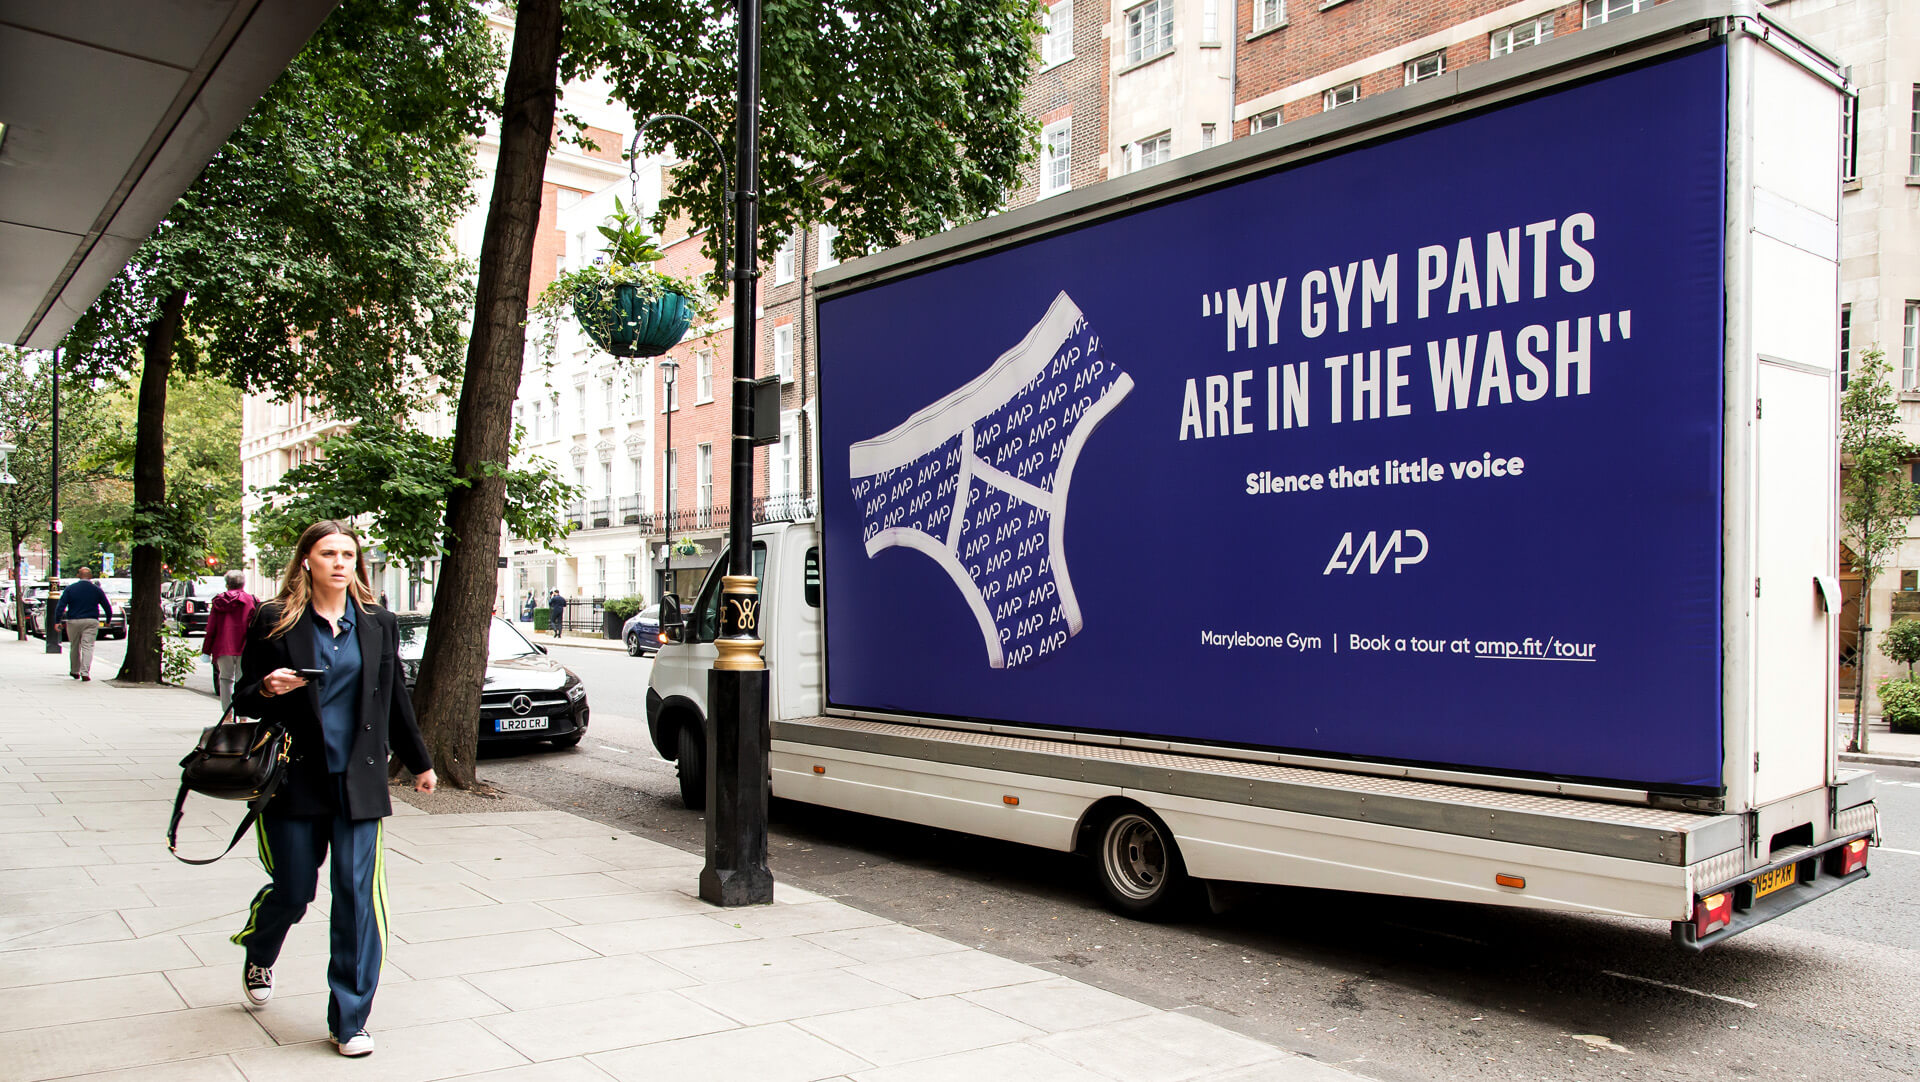 AMP Athletic - Gym pants are in the wash - London advertising campaign - Mellor&Smith